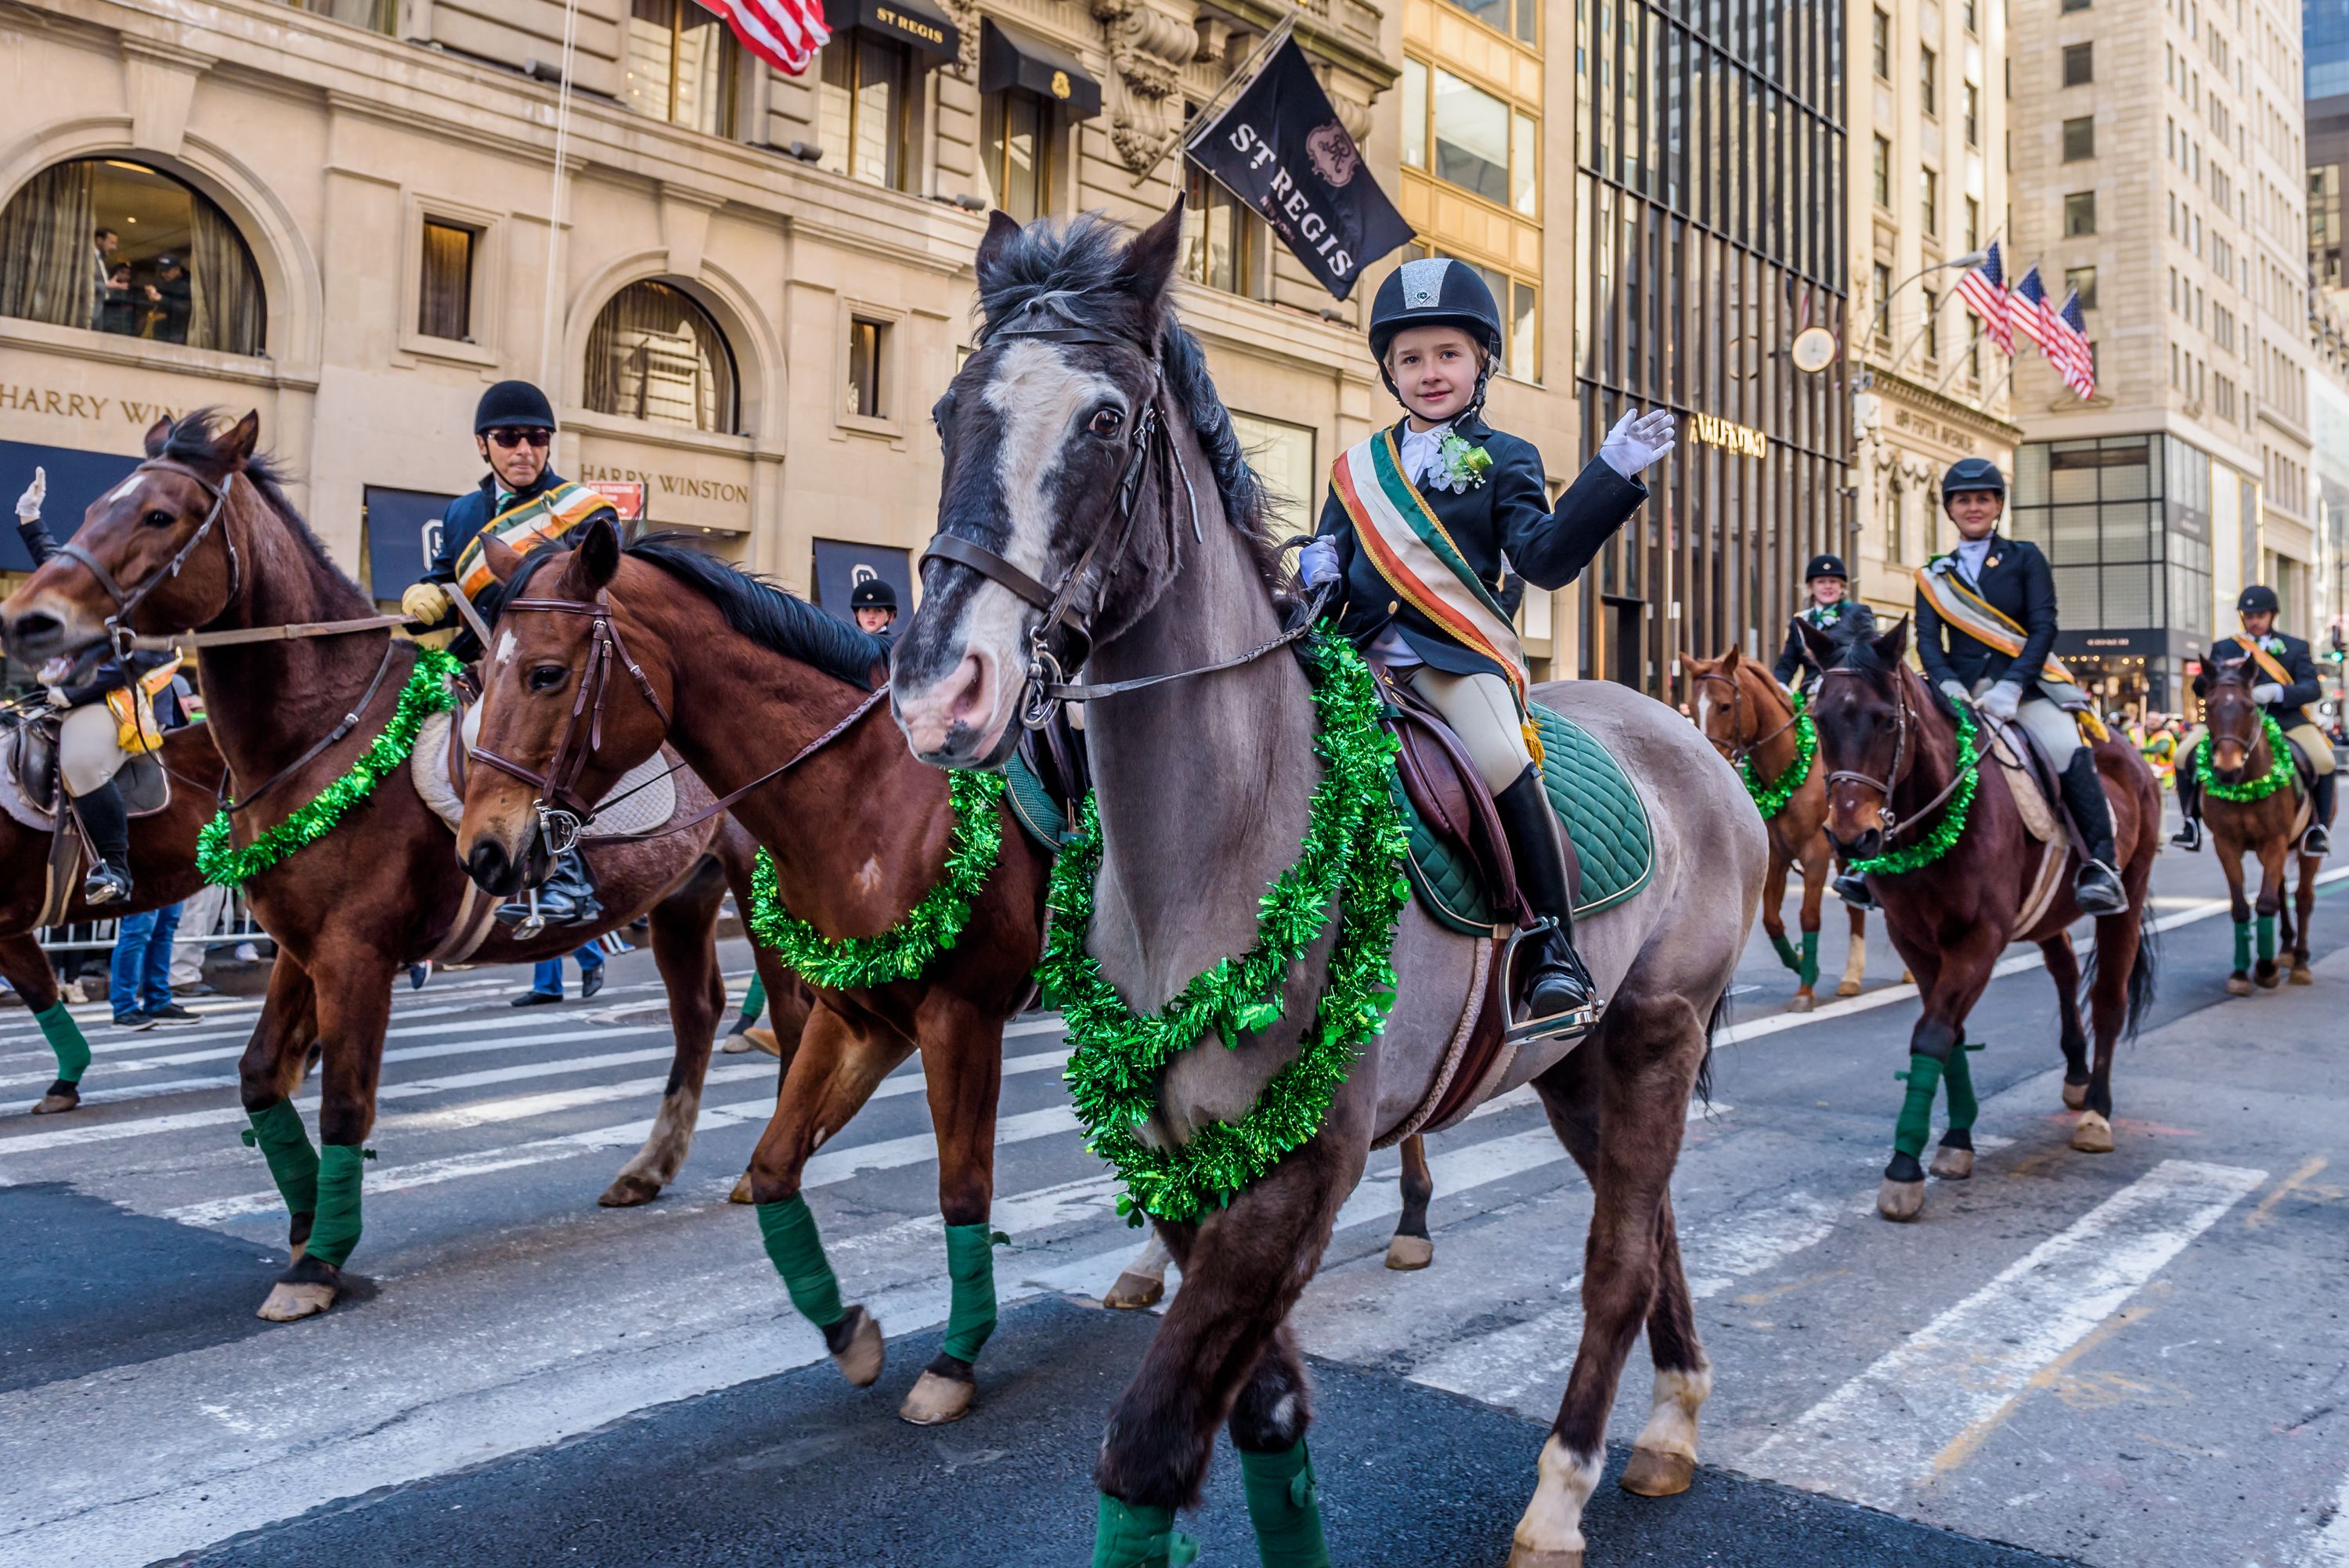 St Patrick's Day - news, events, history and more